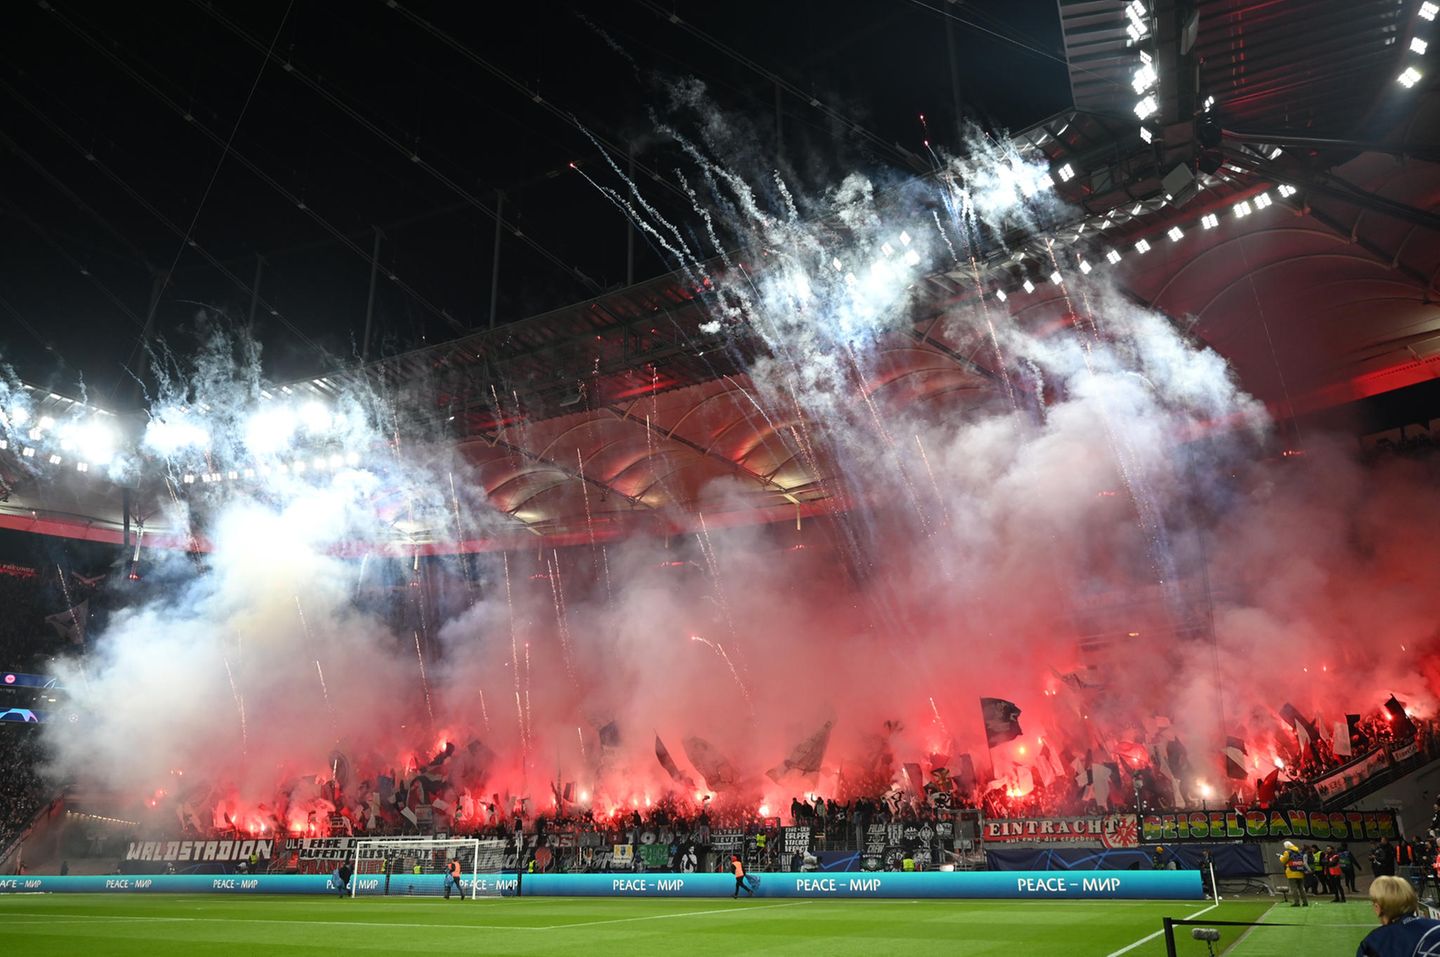 Eintracht Frankfurt: Fans are not allowed into the stadium during the game in Naples